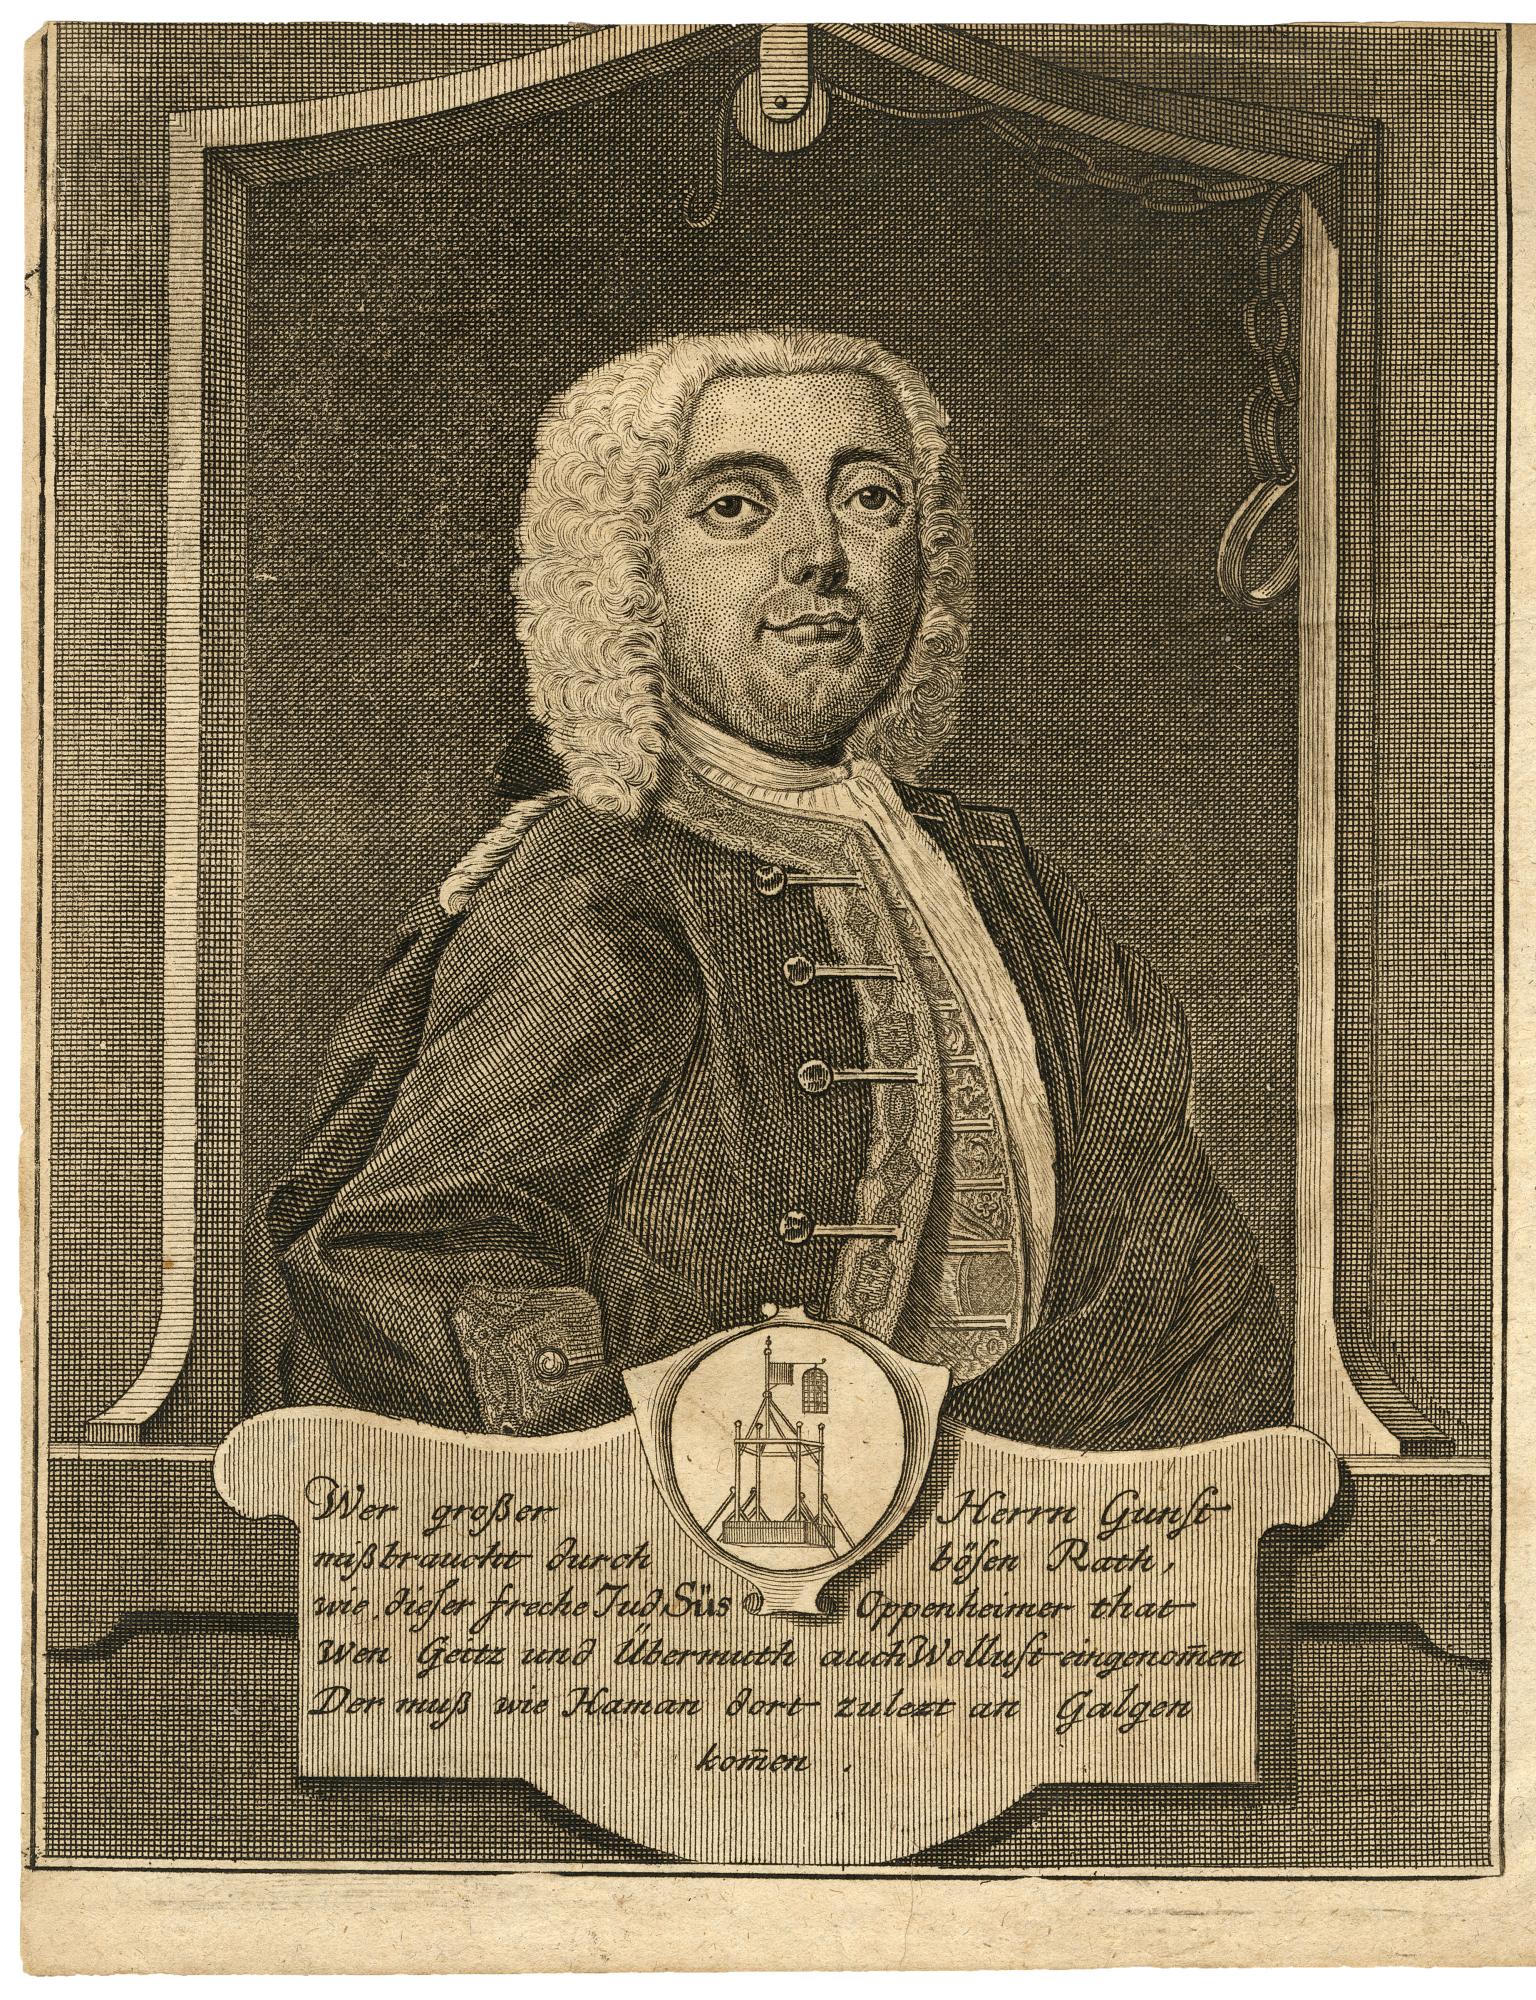 Portrait print of man in curly wig and jacket with German caption and small drawing of gallows below portrait.